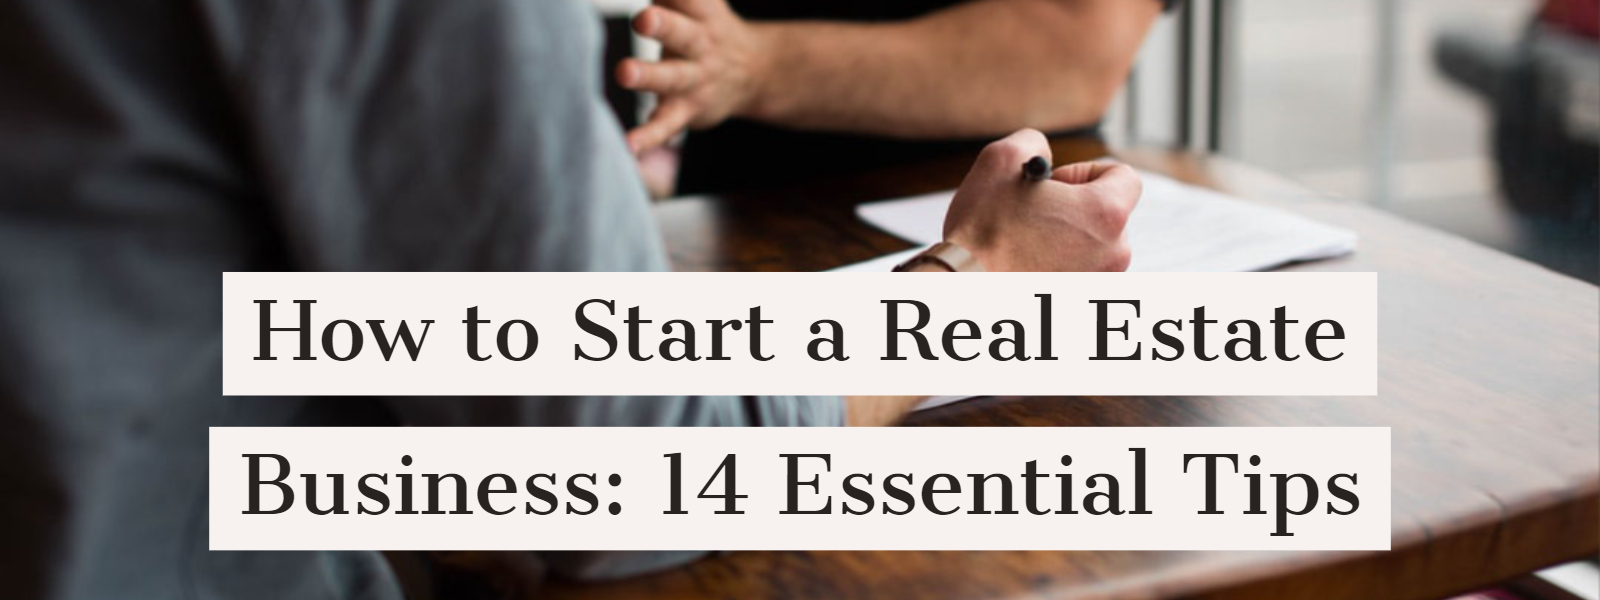 How to Start a Real Estate Business: 14 Essential Tips